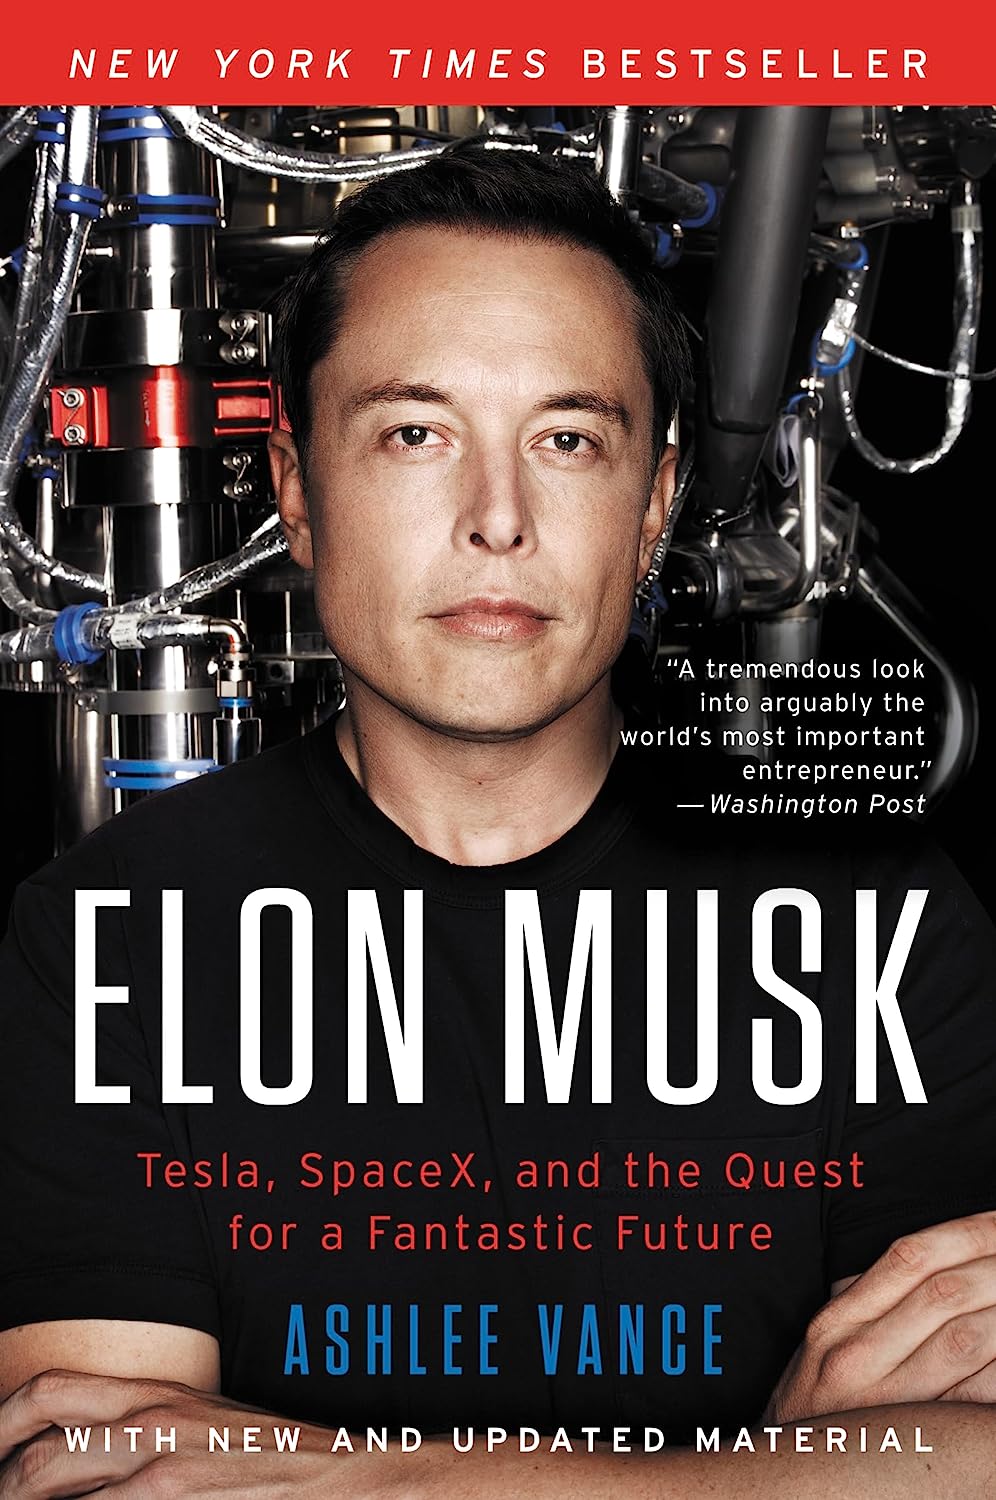 Elon Musk Tesla, SpaceX, and the Quest for a Fantastic Future – Ashlee Vance